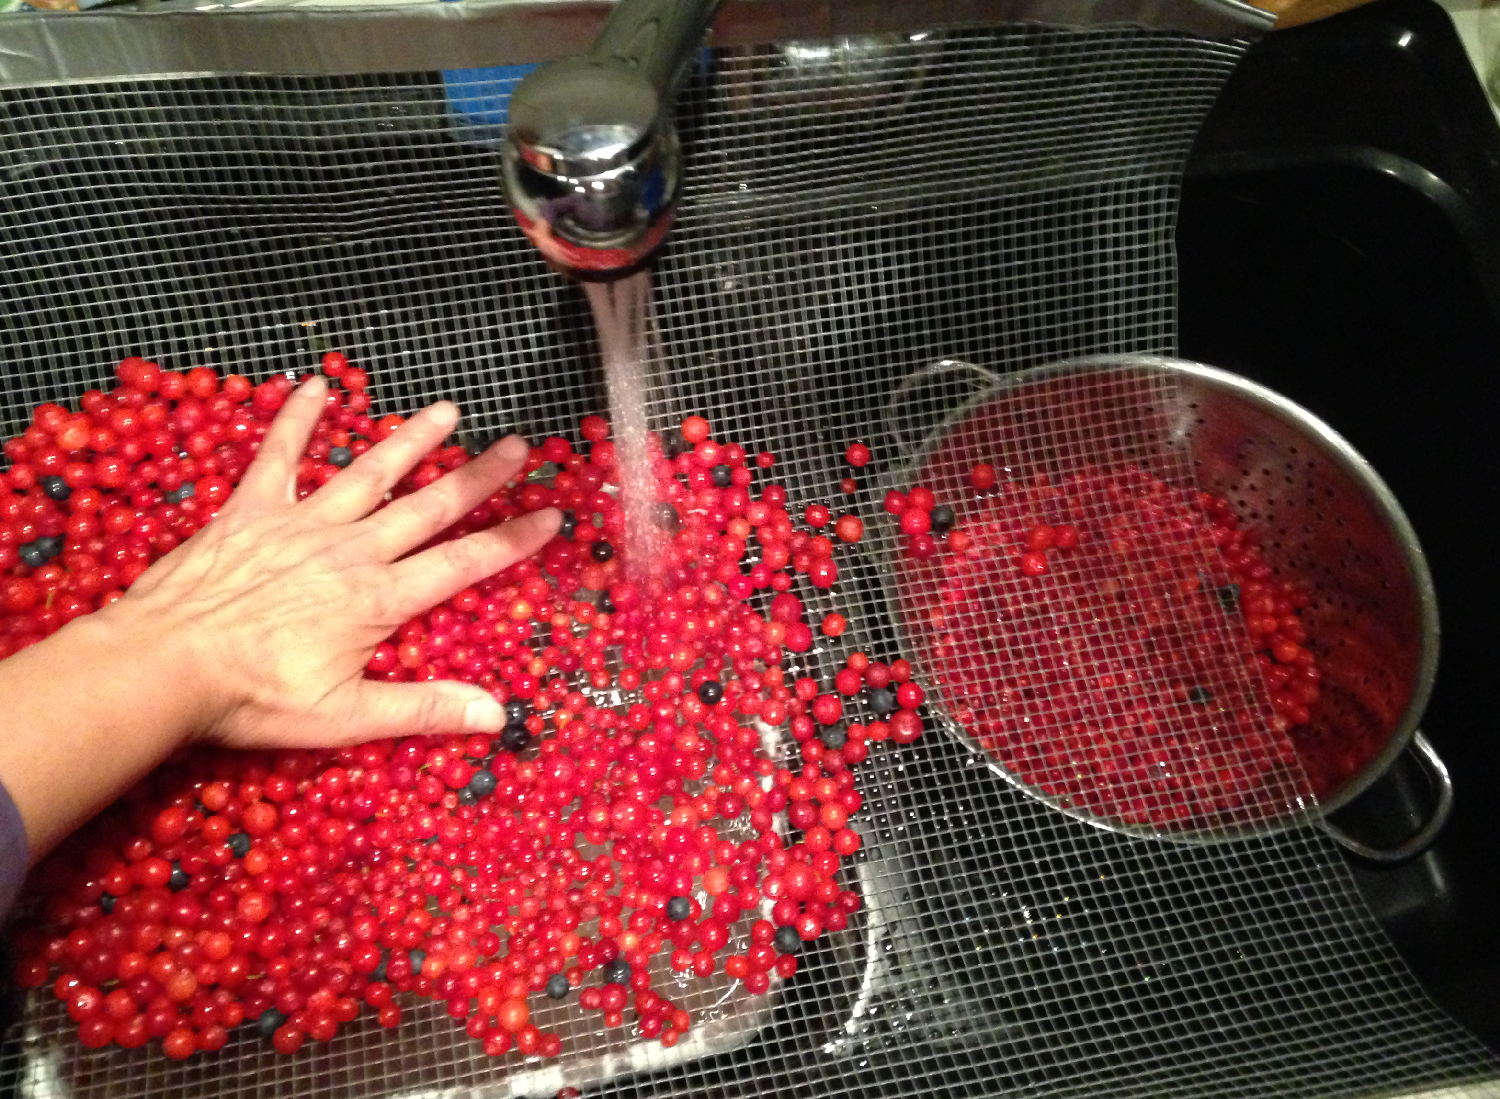 Gently rolling the berries around while rinsing them.